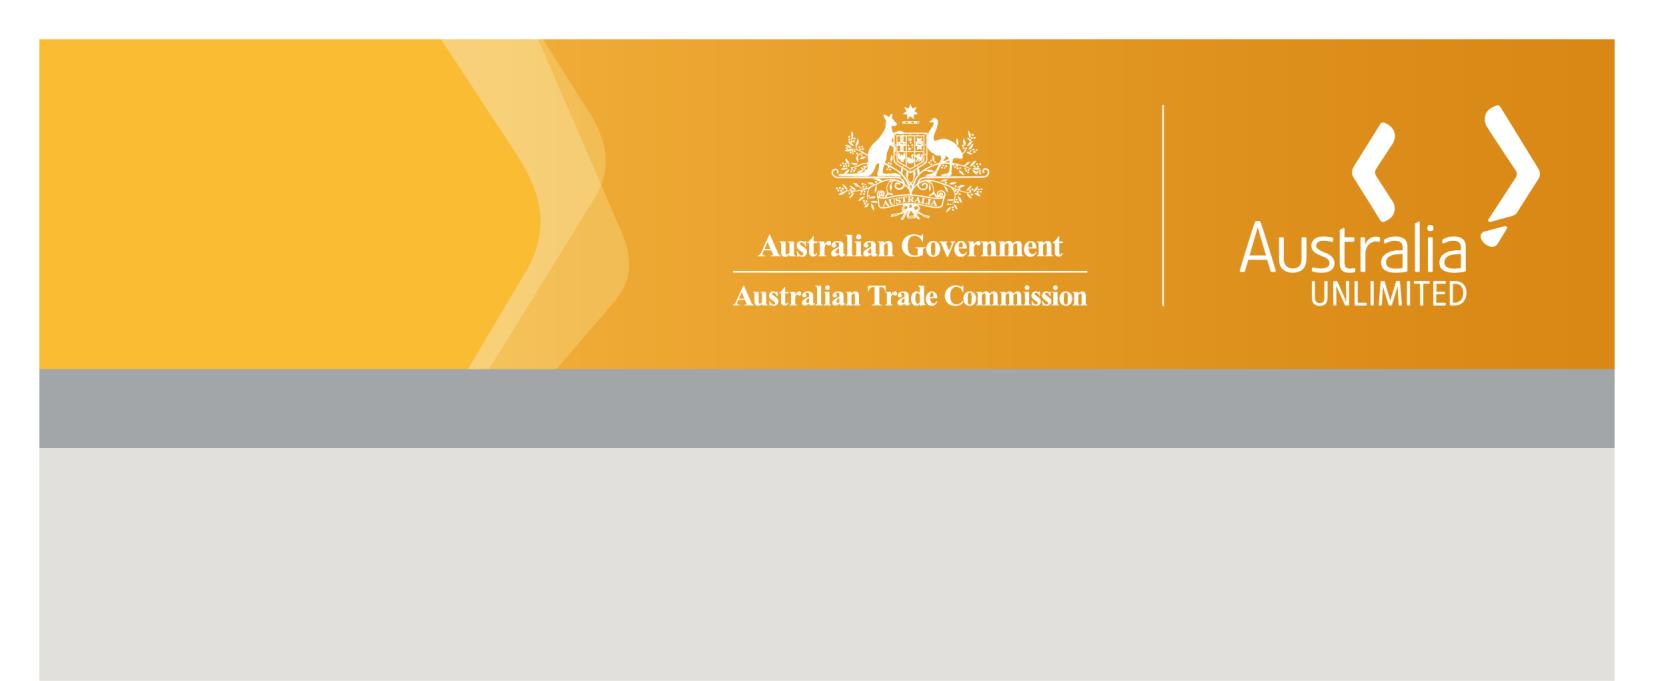 2 INVESTMENT ANALYST SAN FRANCISCO The Australian Trade Commission Austrade contributes to Australia's economic prosperity by helping Australian businesses, education institutions, tourism operators,